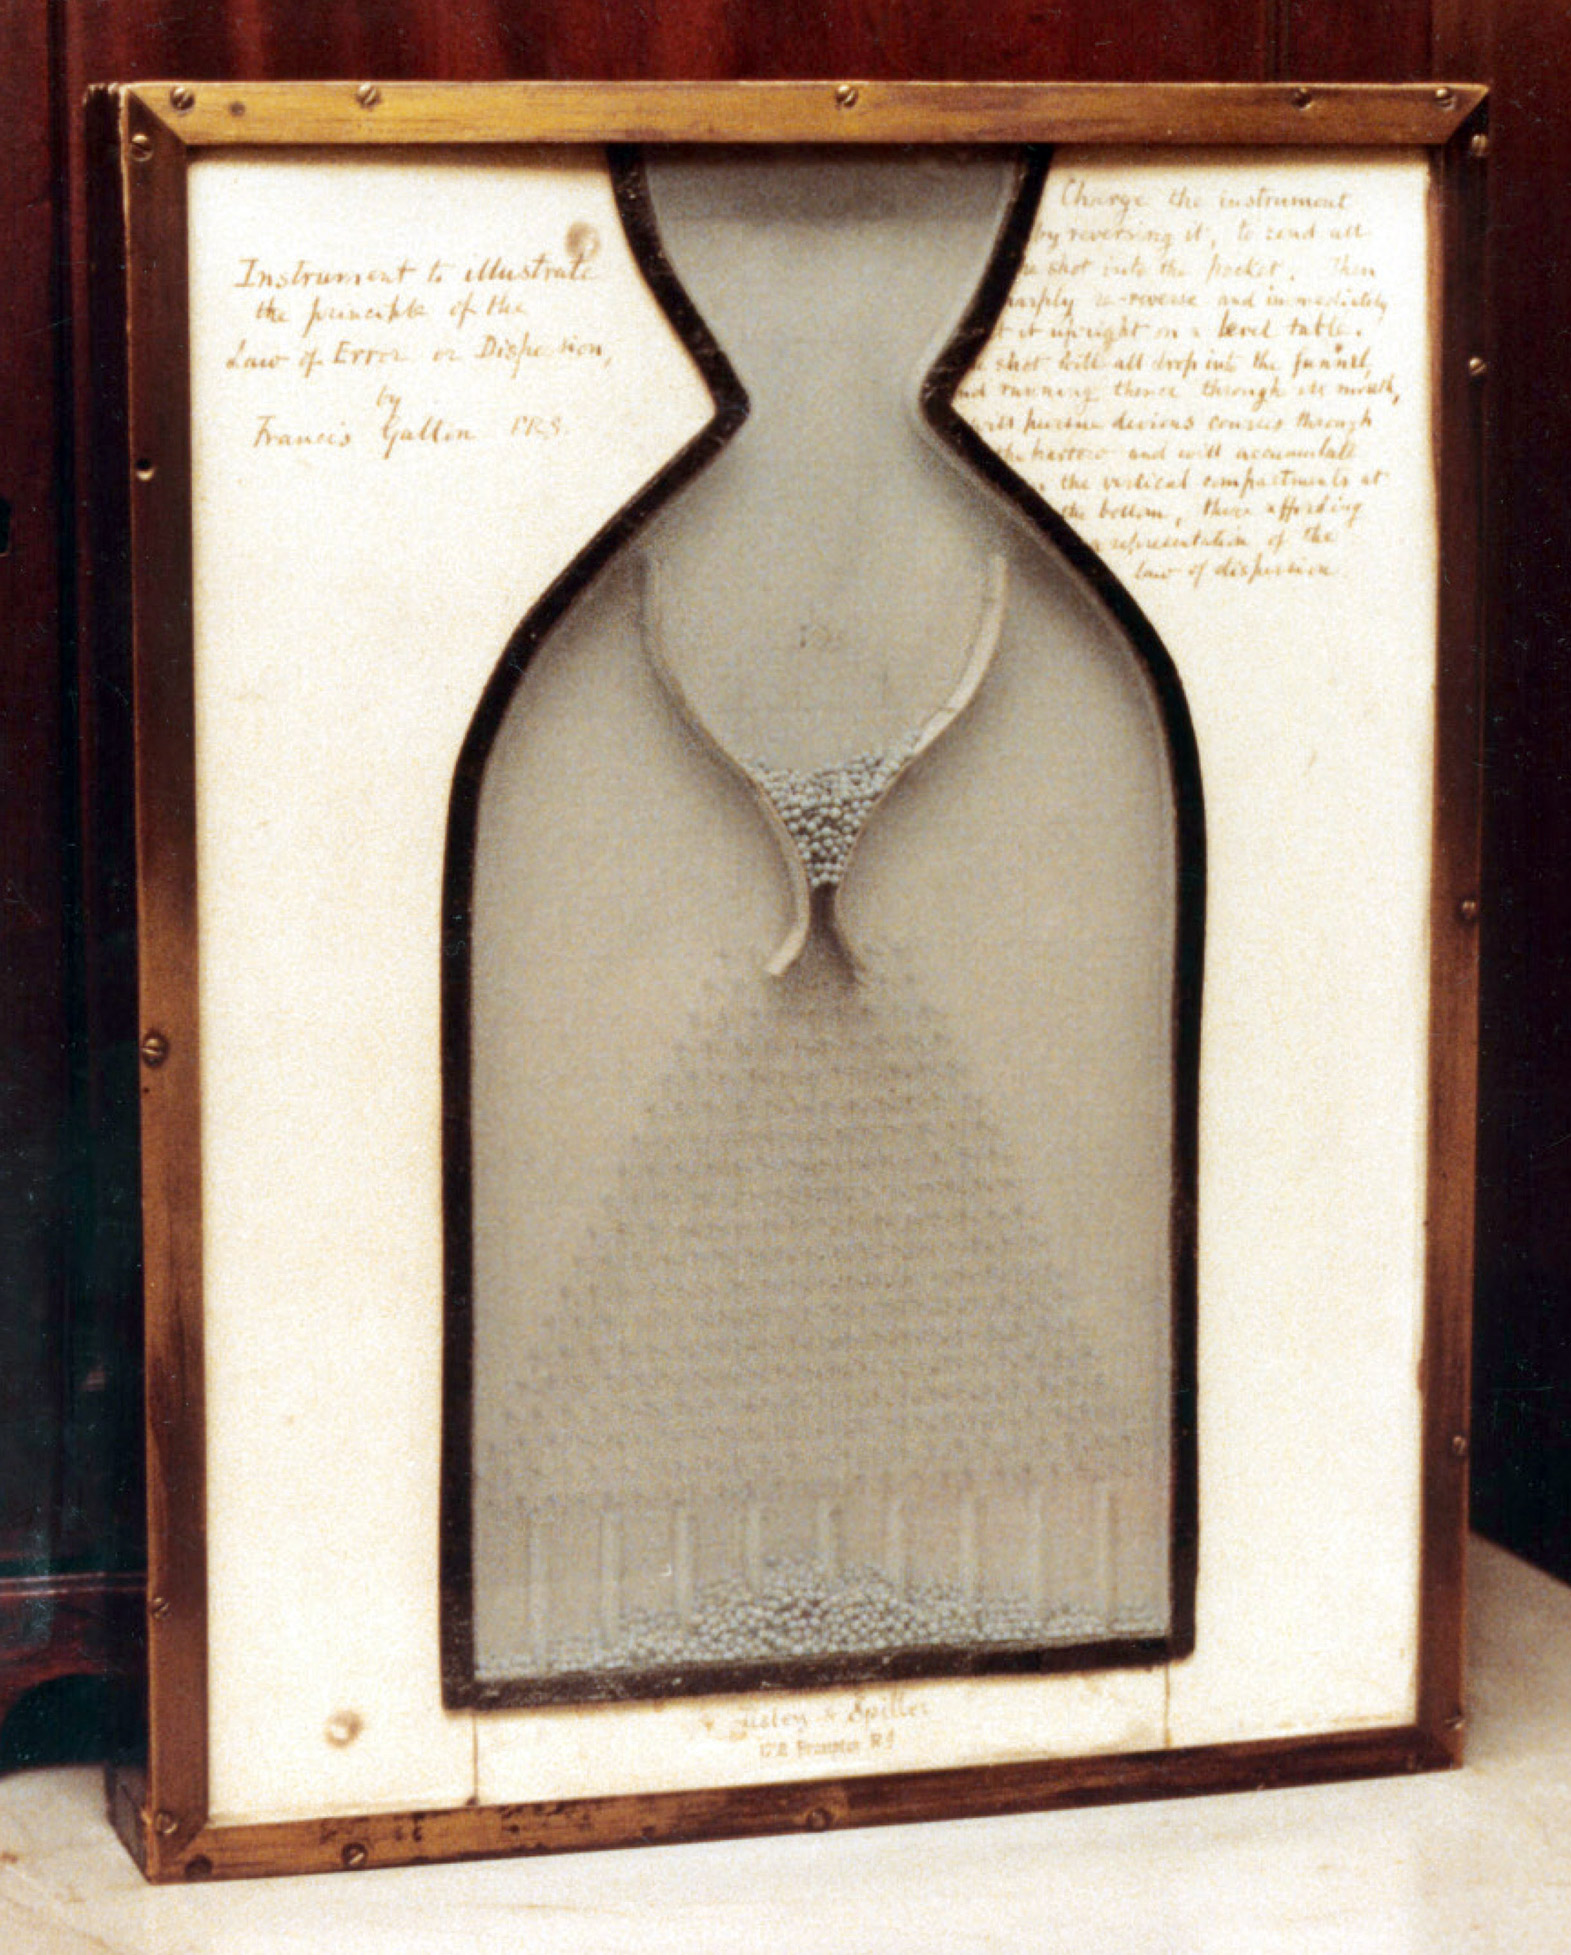 A photograph of a Galton Board on display at the Galton Laboratory, University College London. 